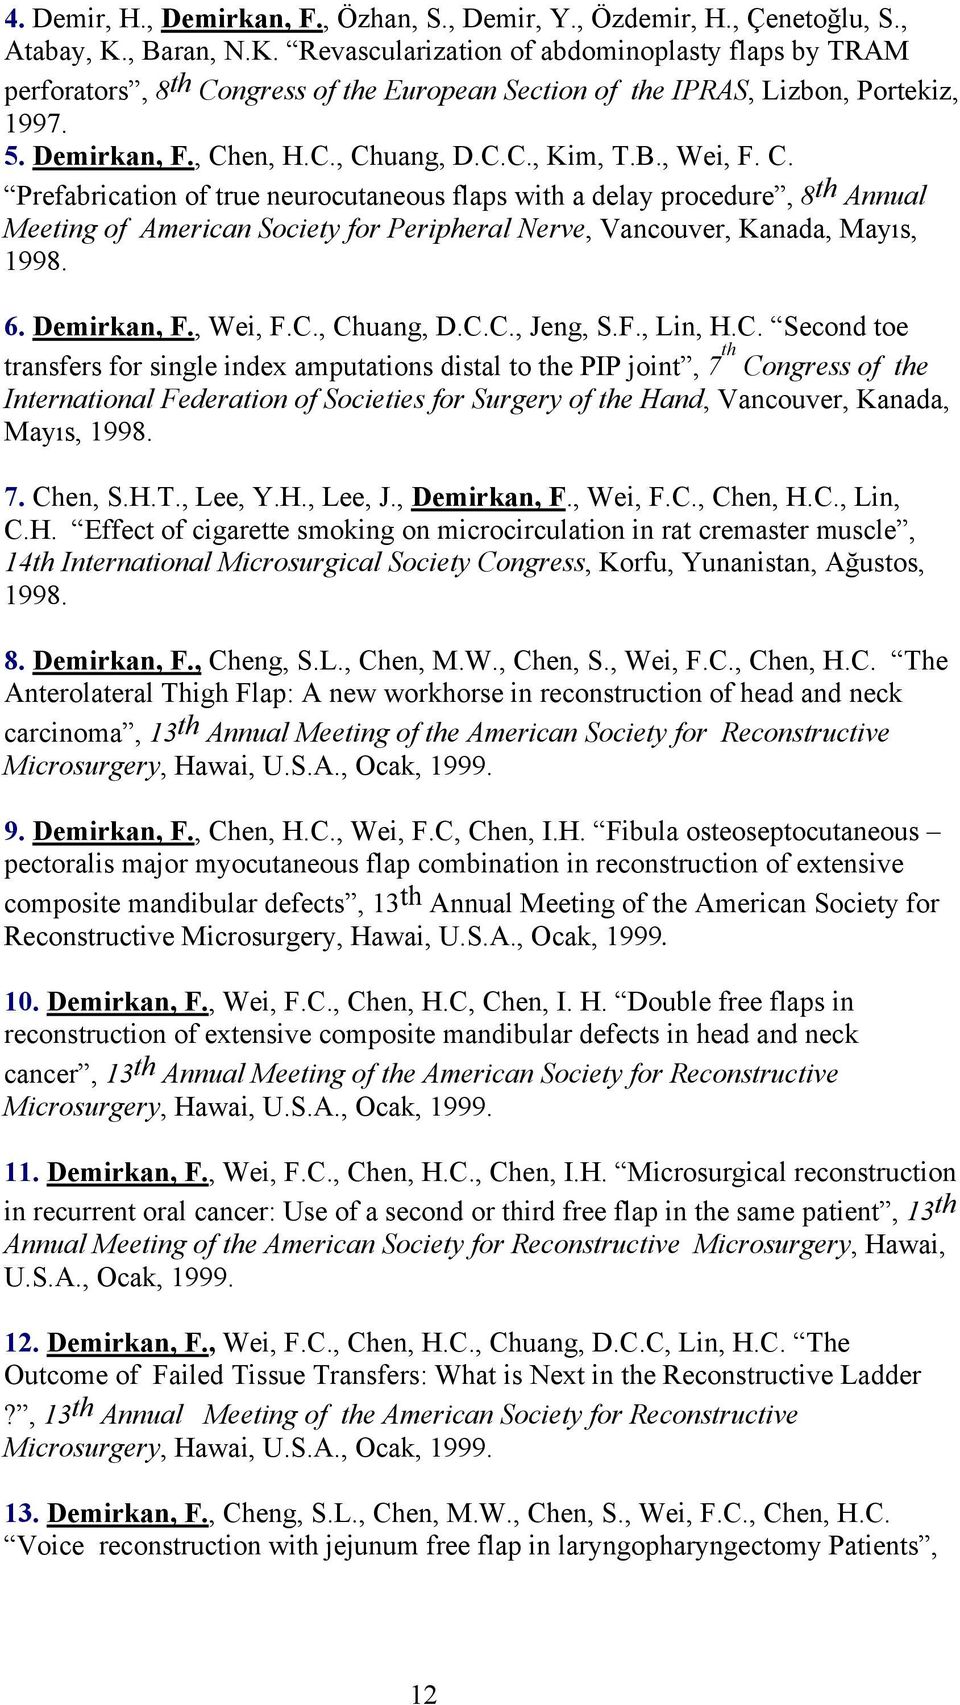 B., Wei, F. C. Prefabrication of true neurocutaneous flaps with a delay procedure, 8 th Annual Meeting of American Society for Peripheral Nerve, Vancouver, Kanada, Mayıs, 1998. 6. Demirkan, F.